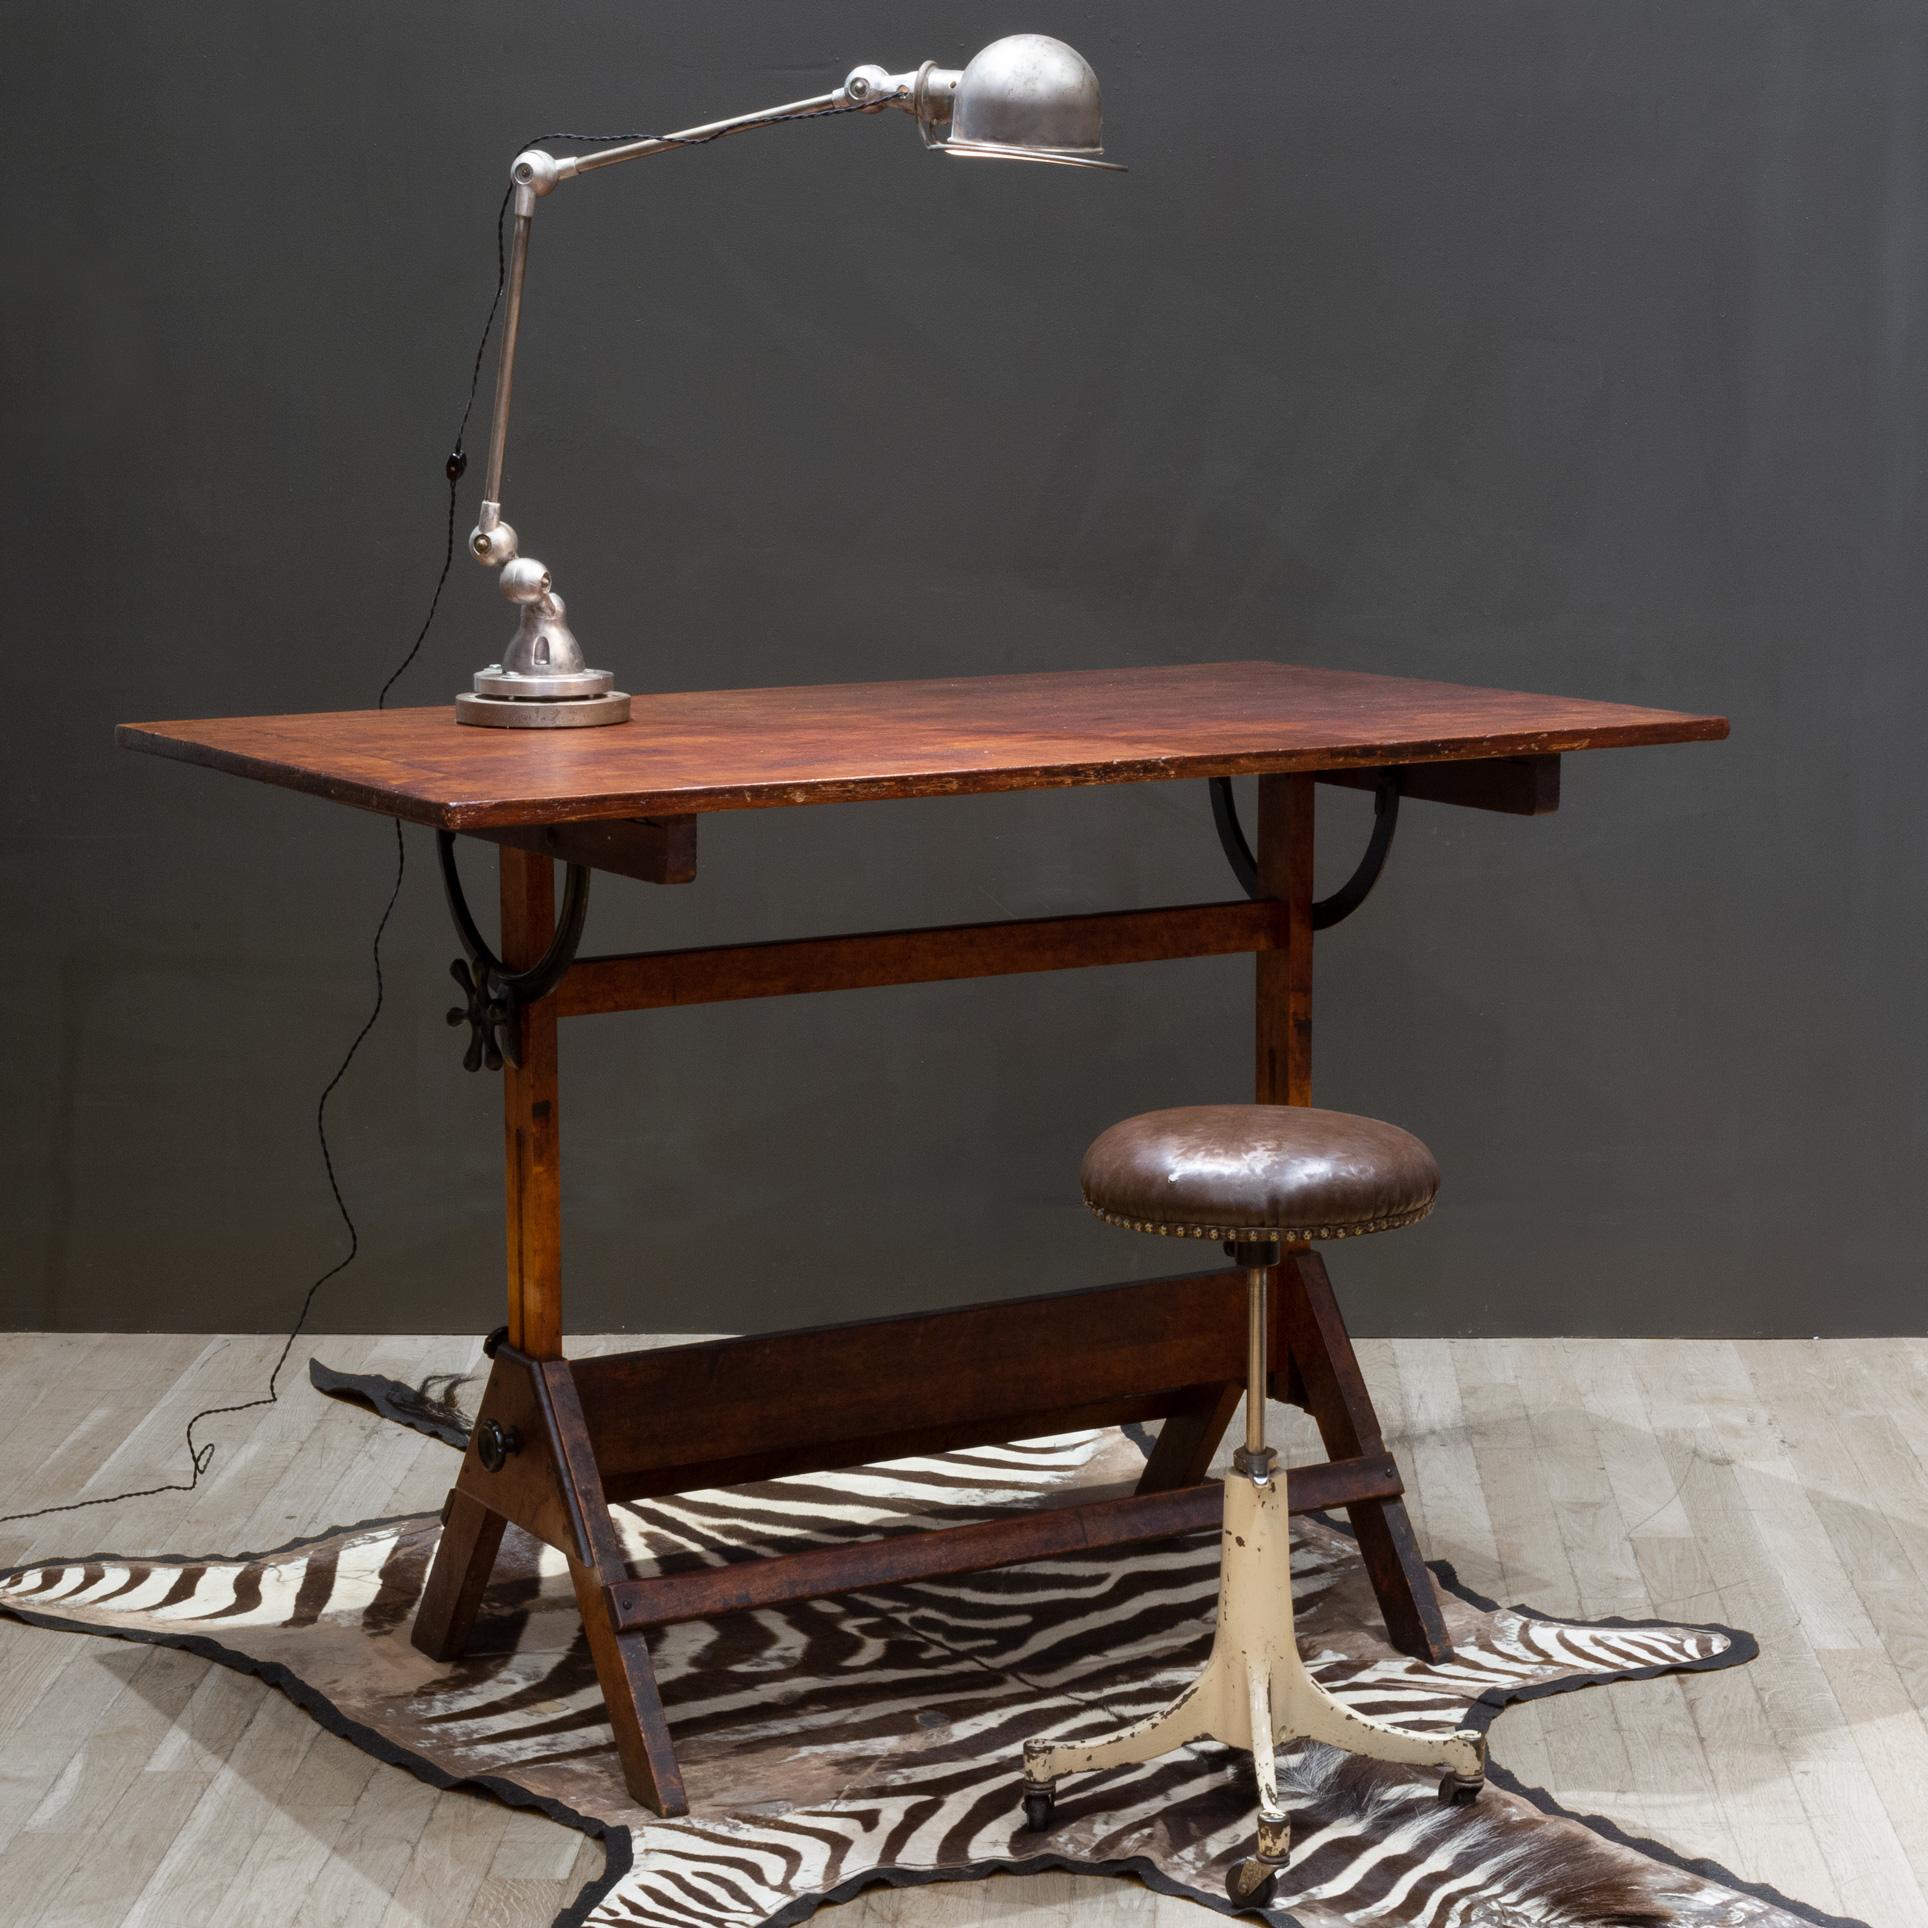 ABOUT

Contact us for more affordable shipping options: S16 Home San Francisco. 

A fully adjustable industrial drafting table with solid Maple top, wooden base and solid cast iron black knobs. Original brass Hamilton label.

The table can be used